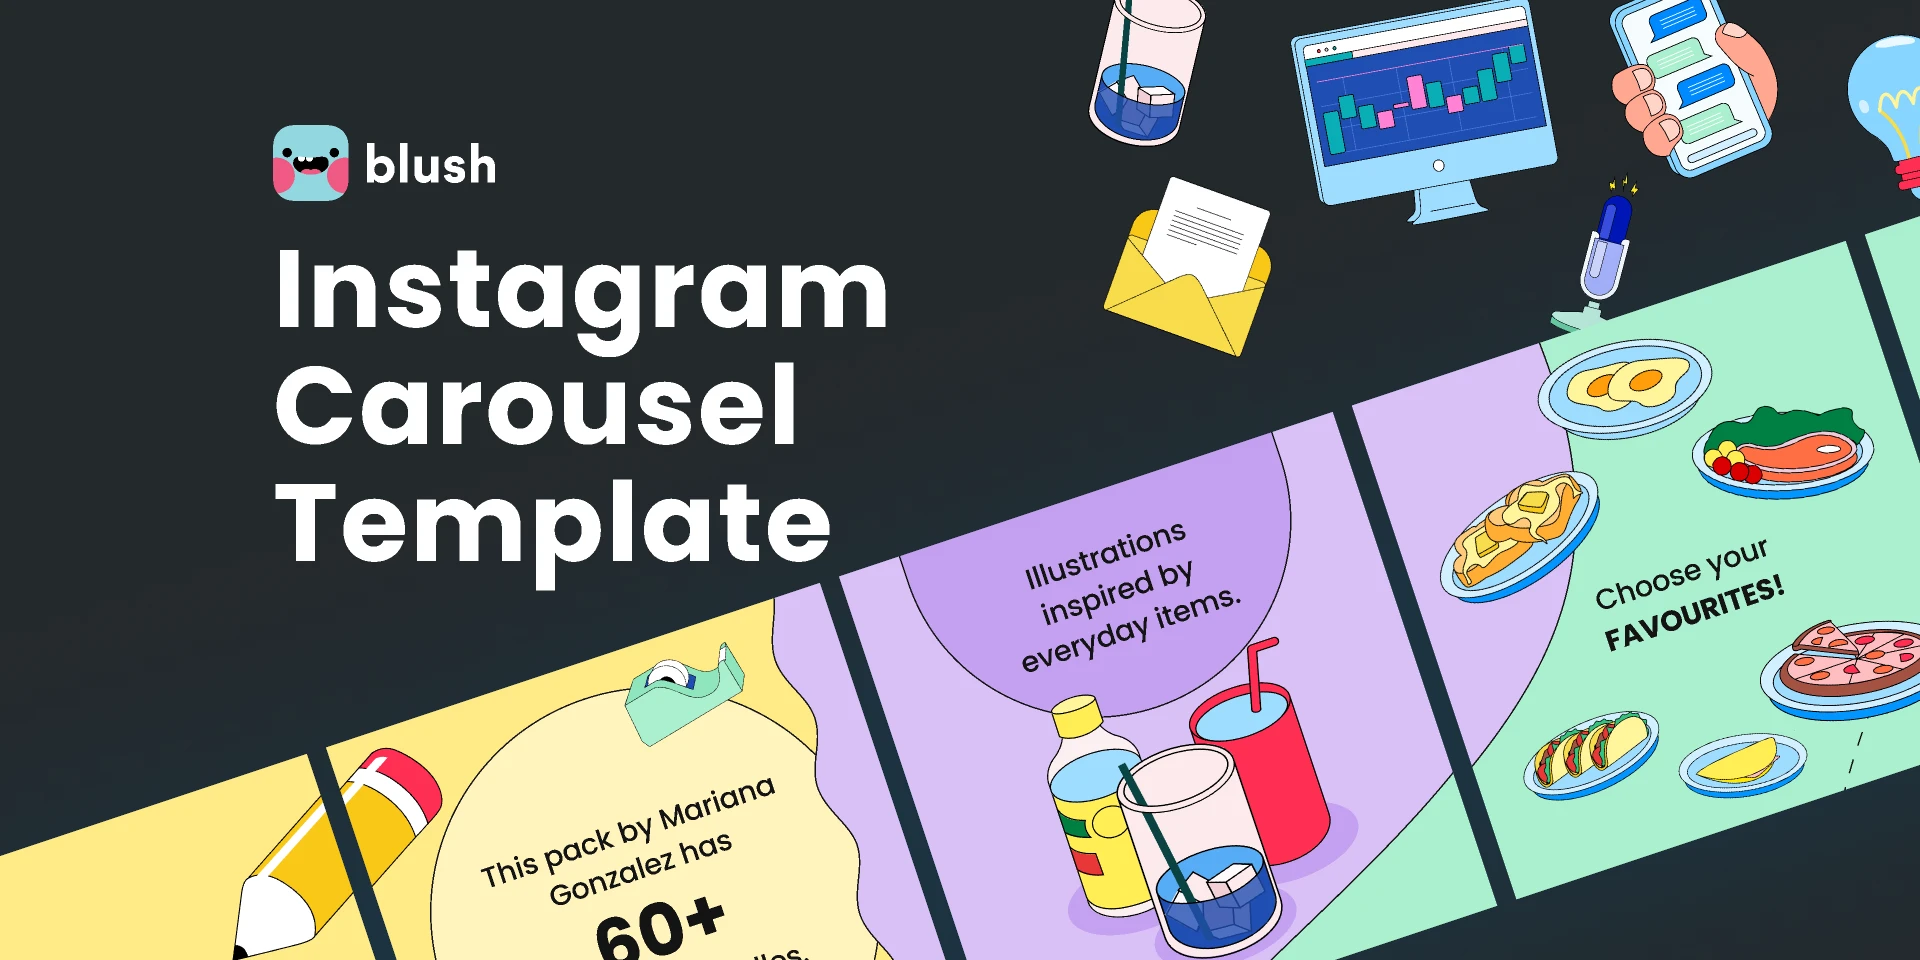 Instagram Carousel Template with Illustrations for Figma and Adobe XD